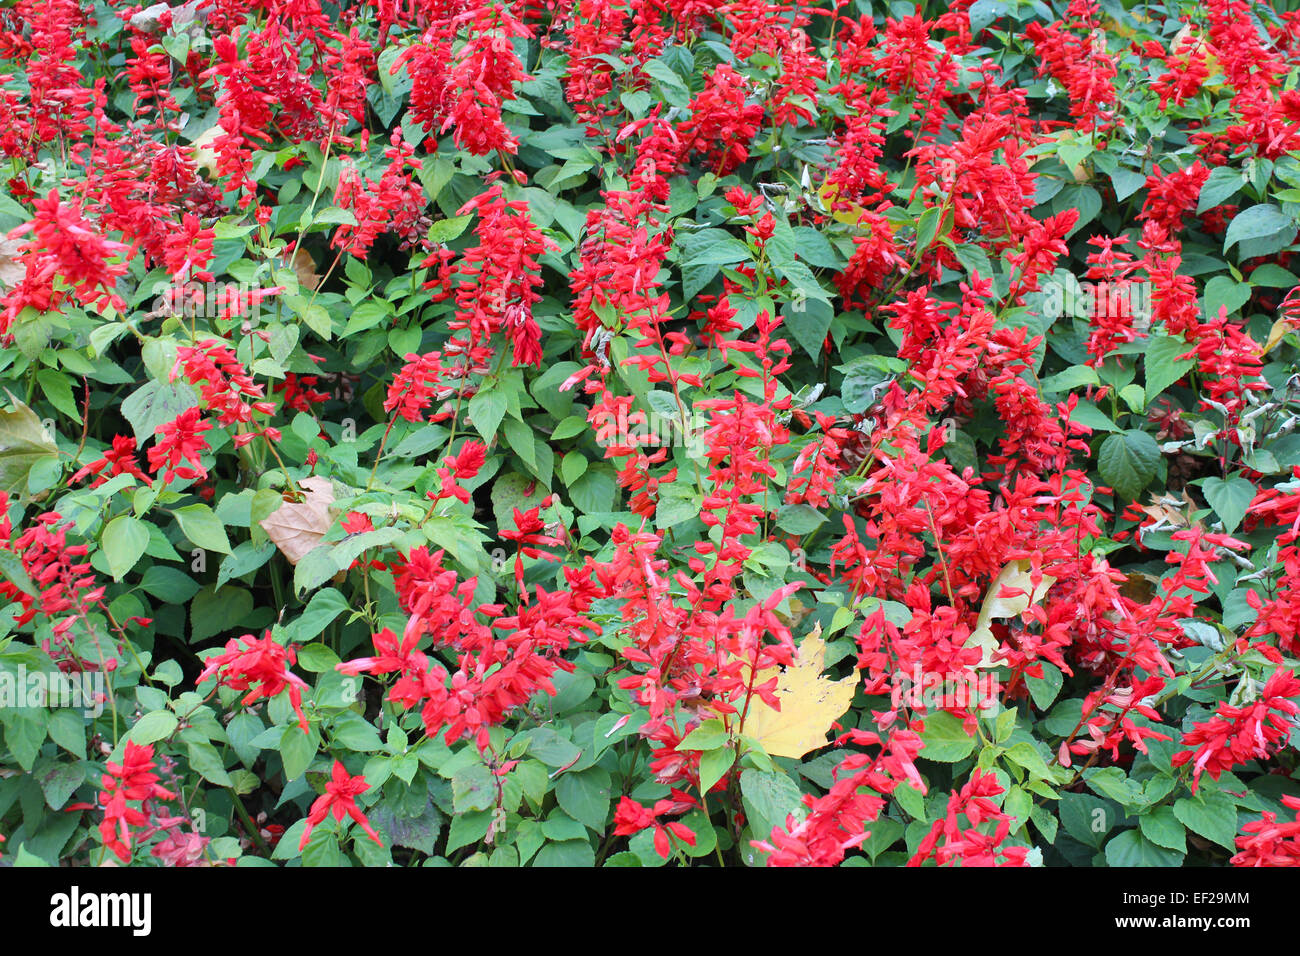 beautiful bed with red flowers of salvia Stock Photo